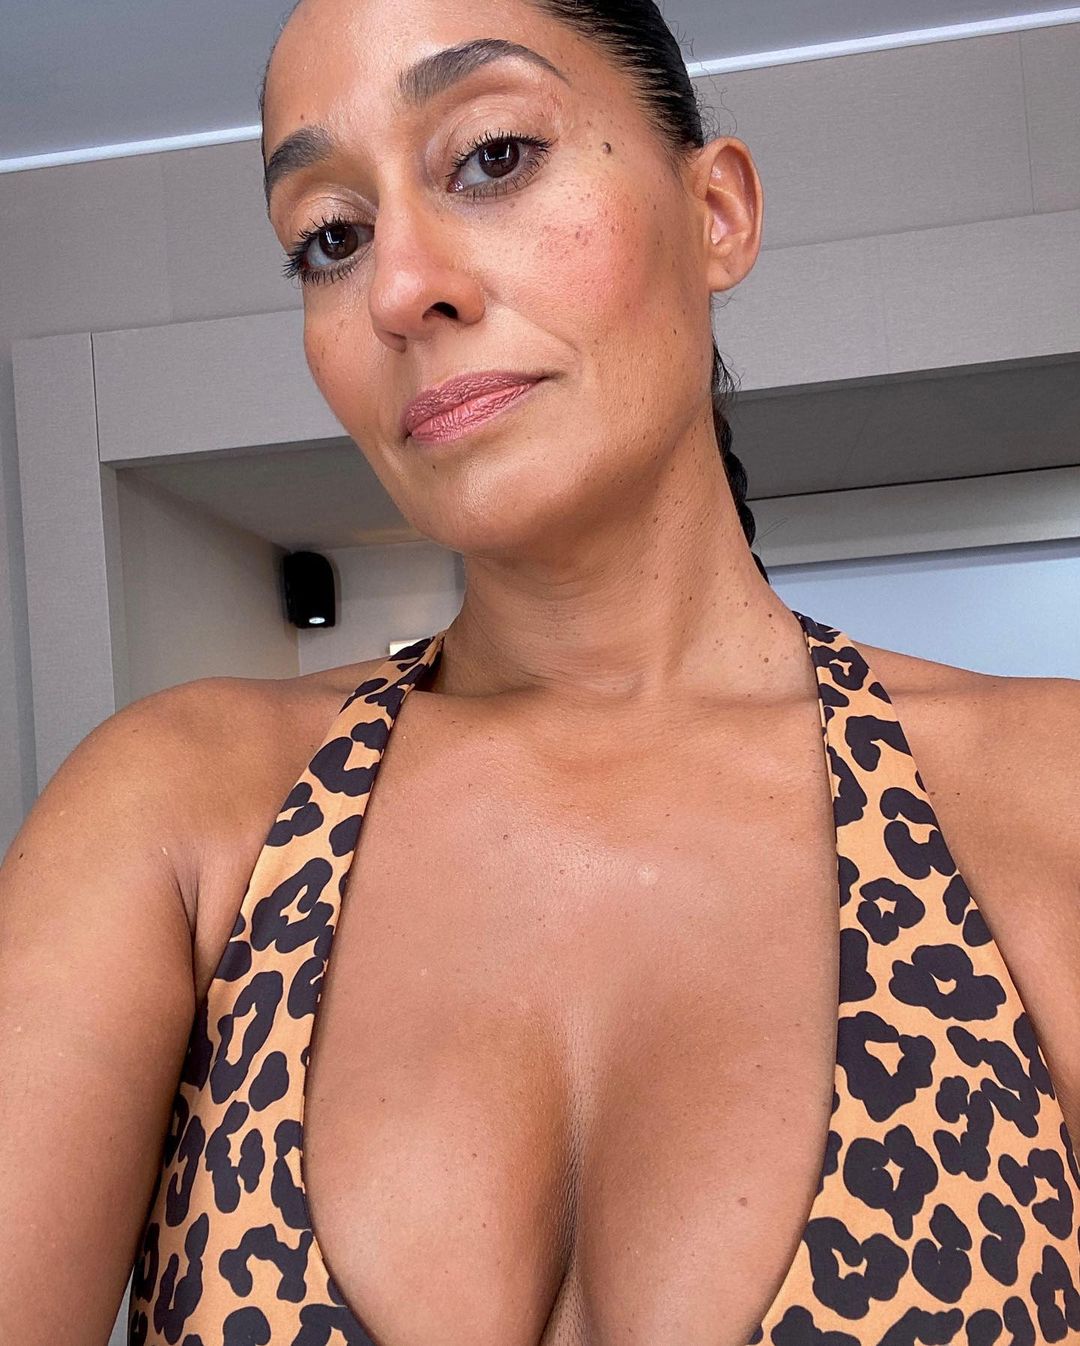 Tracee Ellis Ross Thirst Trapping Now and Then!